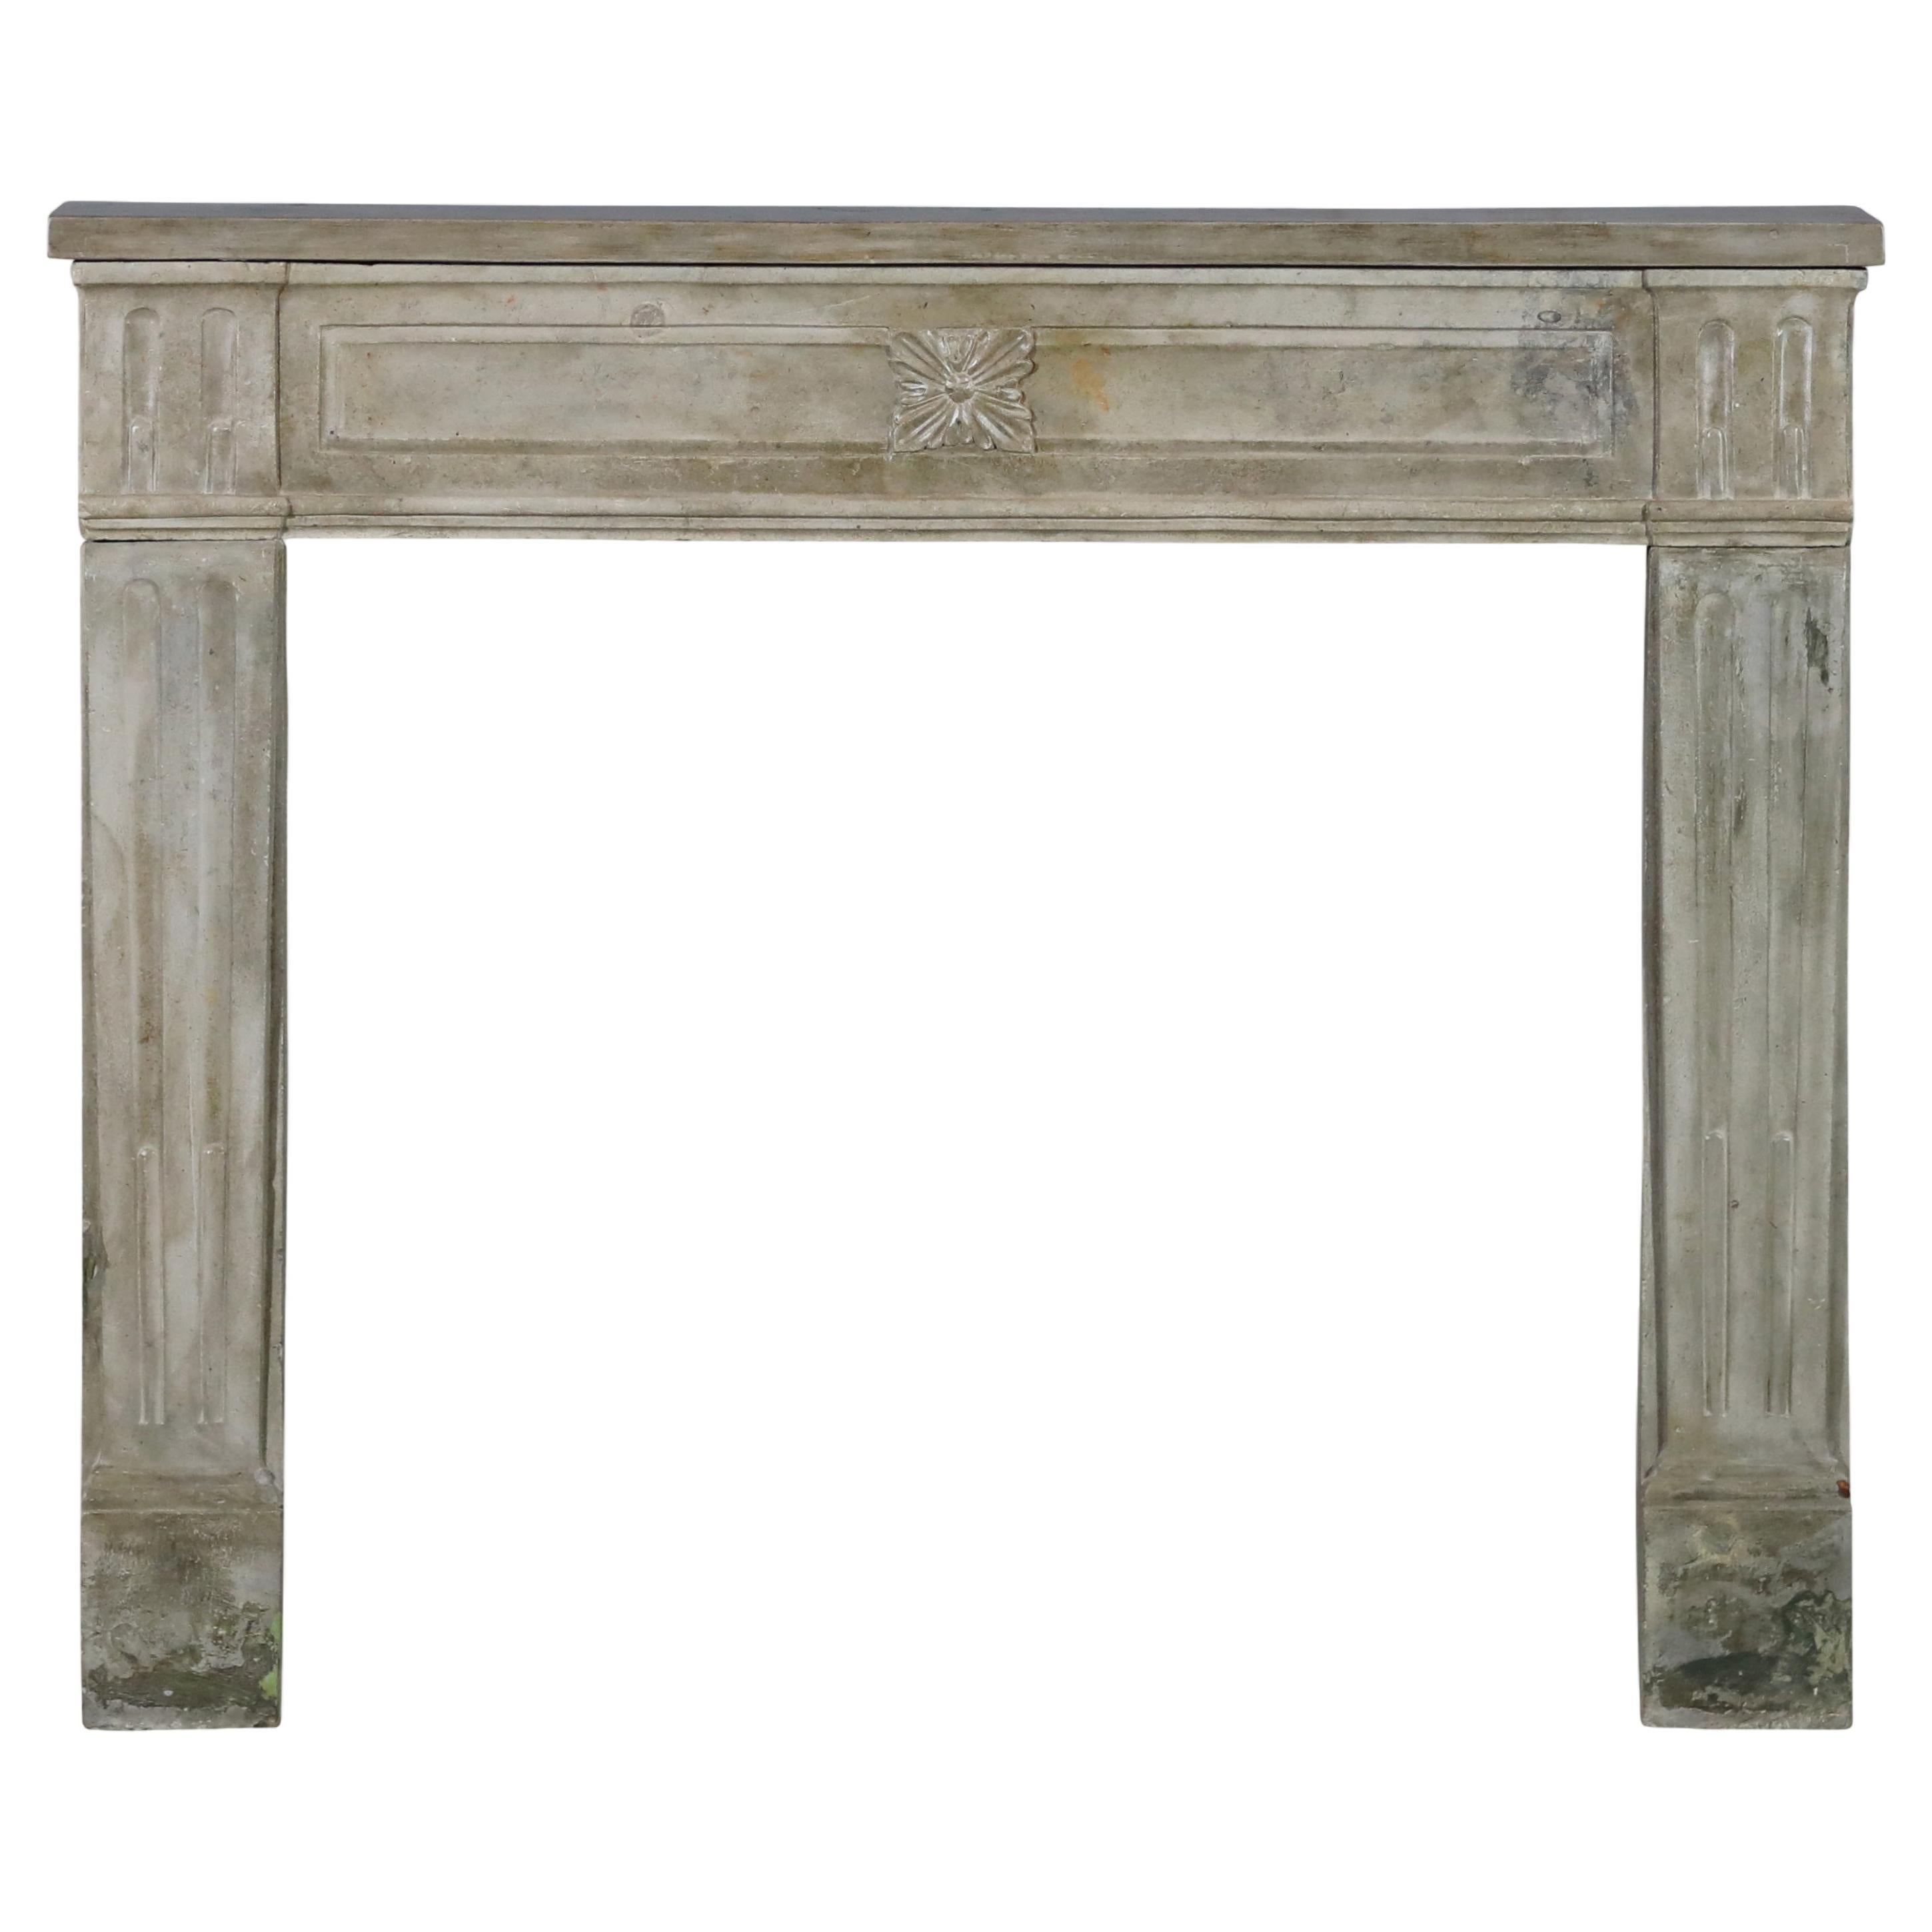 18th Century French Louis XVI Statement Fireplace From Paris For Sale